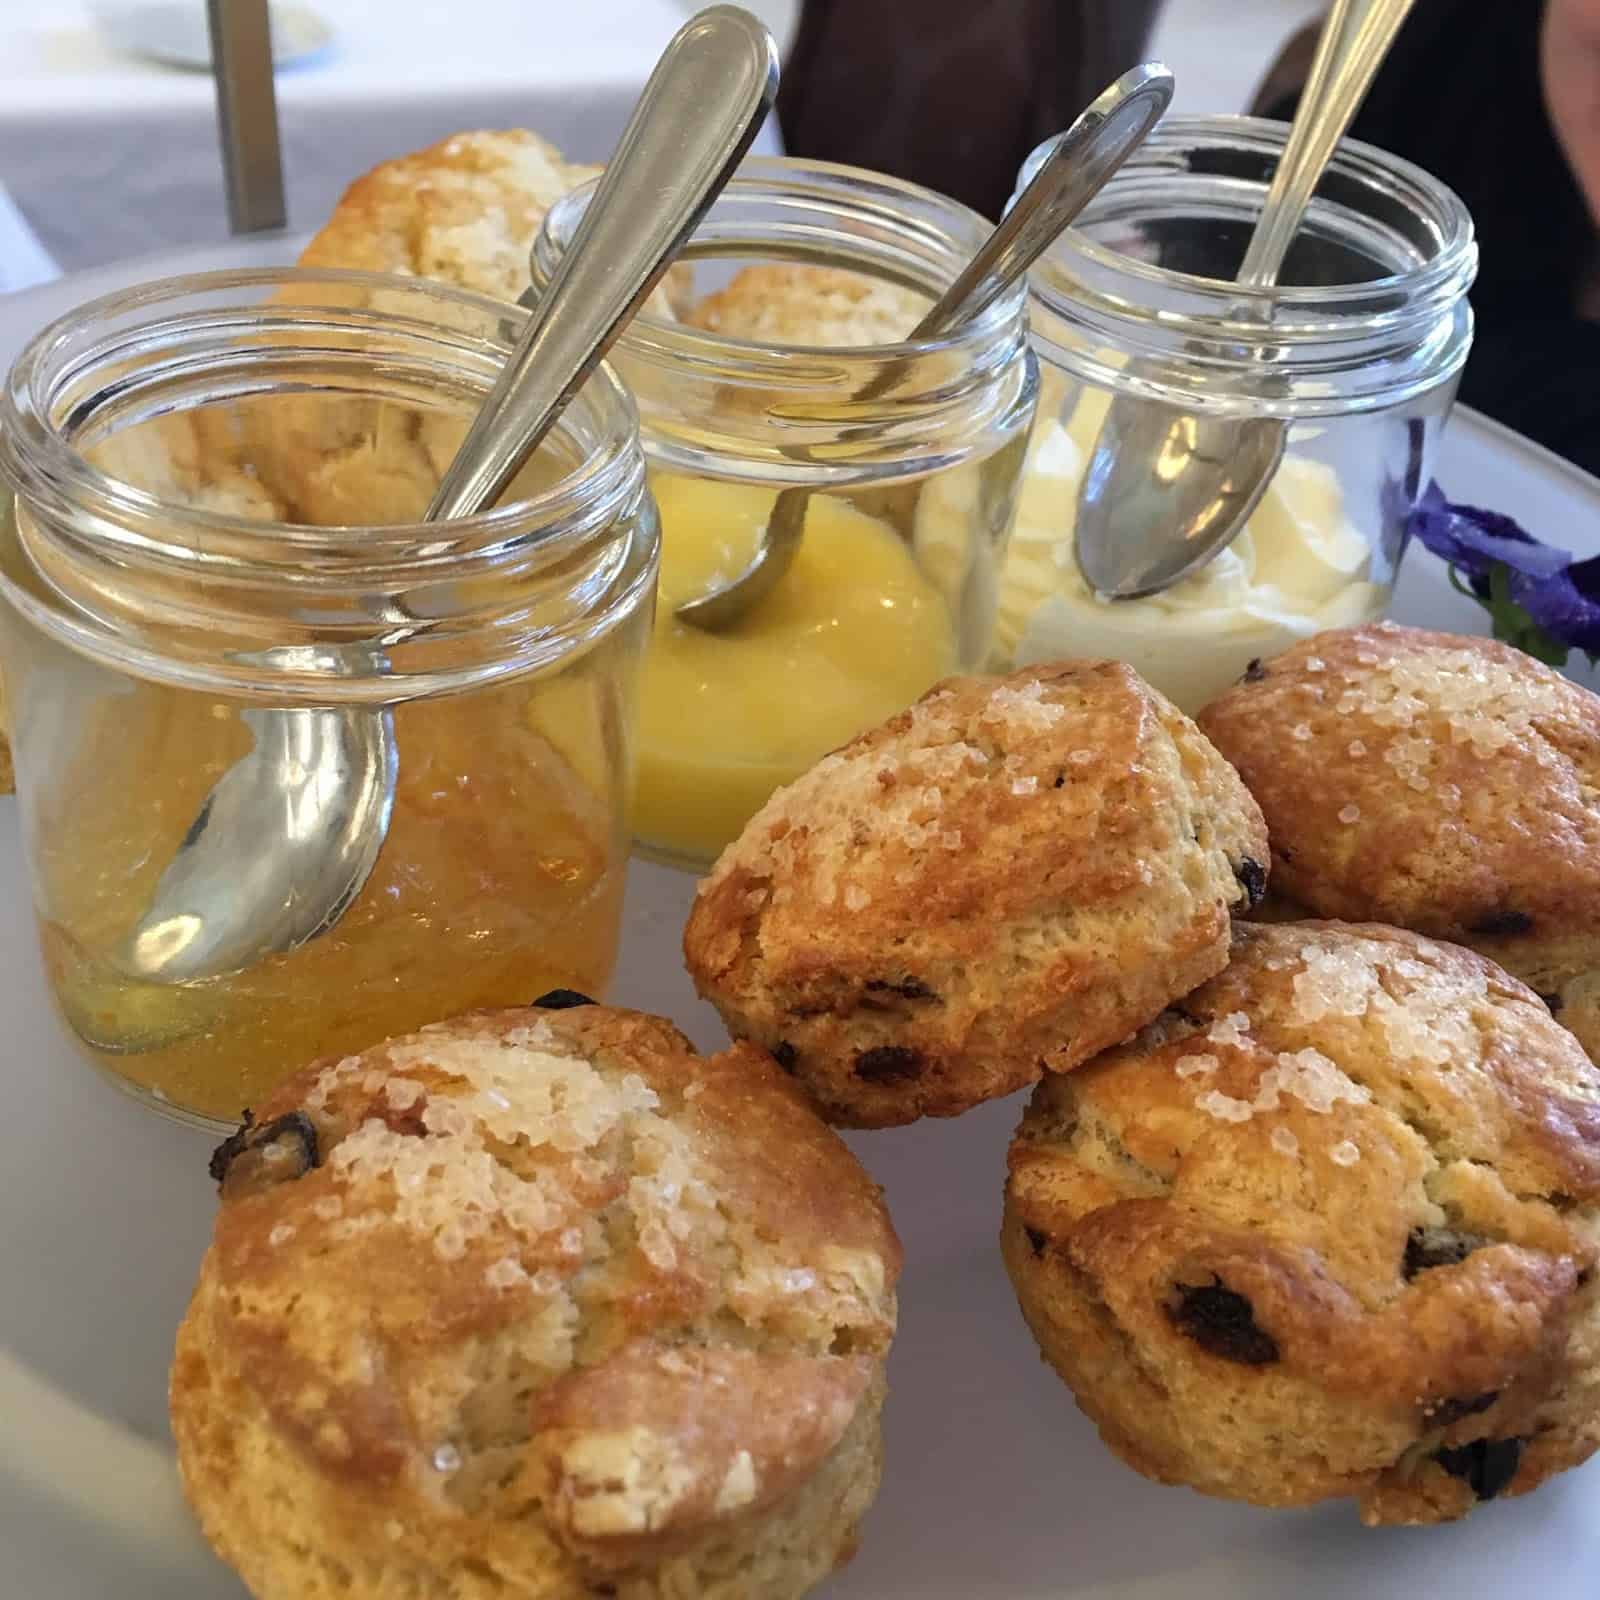 Courtyard Tea Room - scones and acoutrements